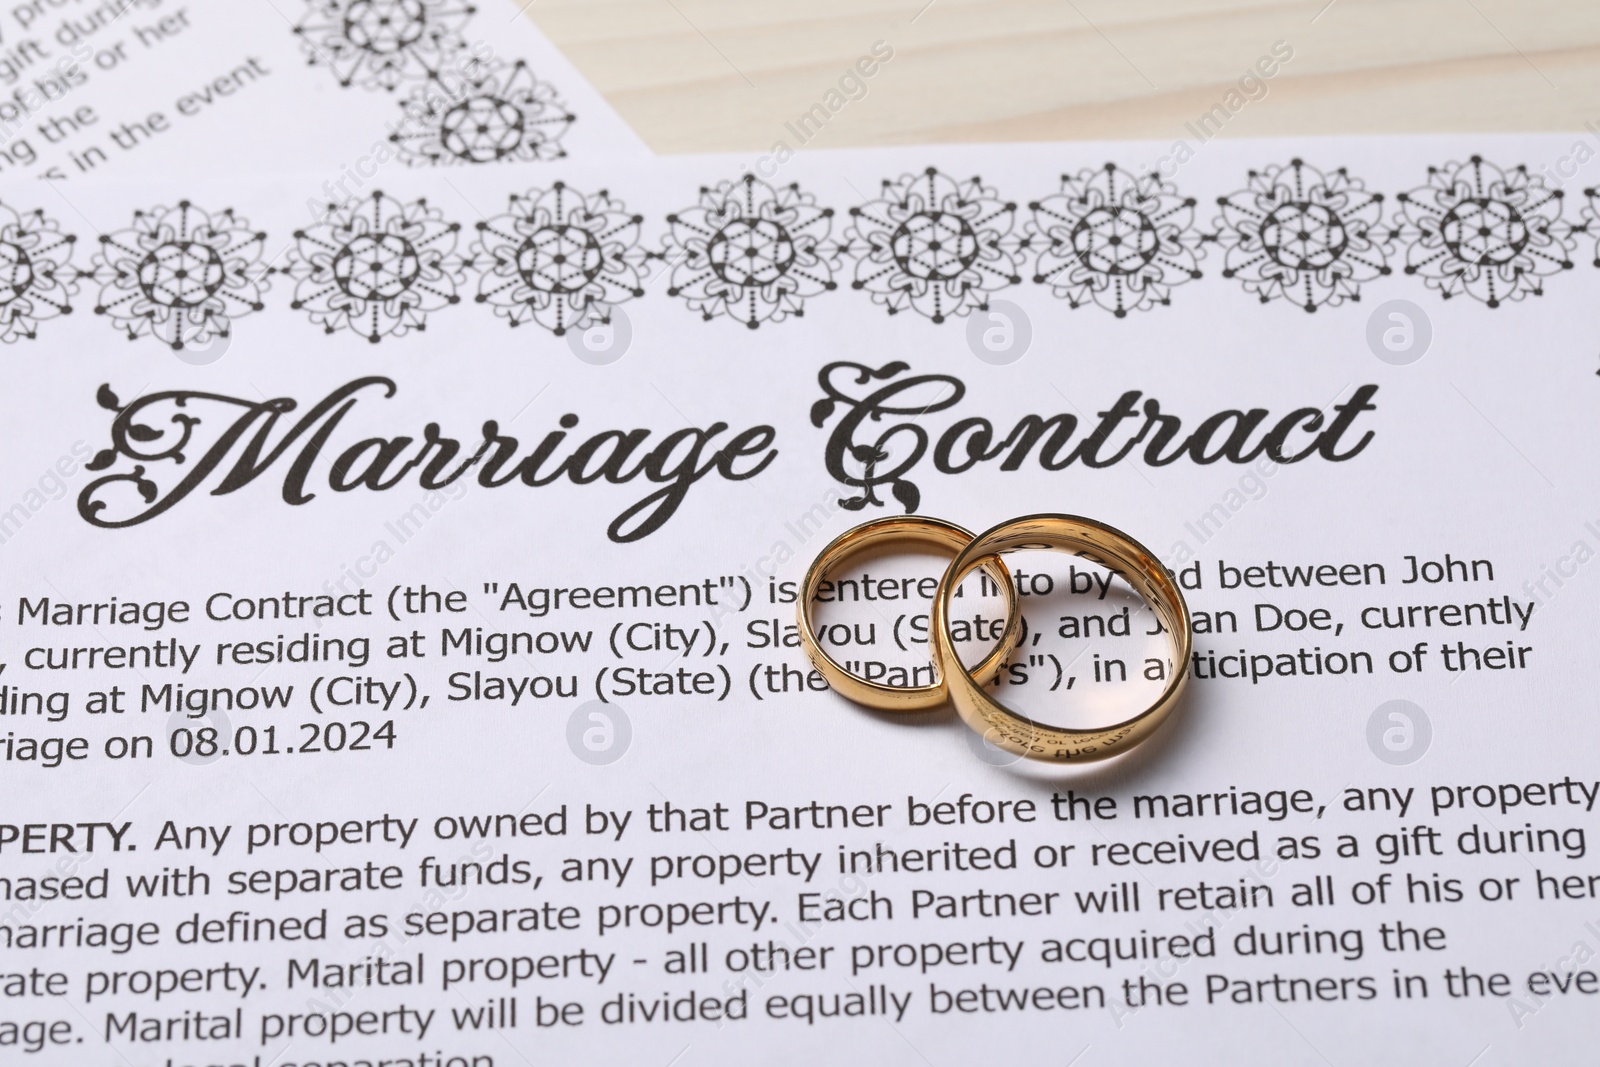 Photo of Marriage contracts and gold rings on light wooden table, above view